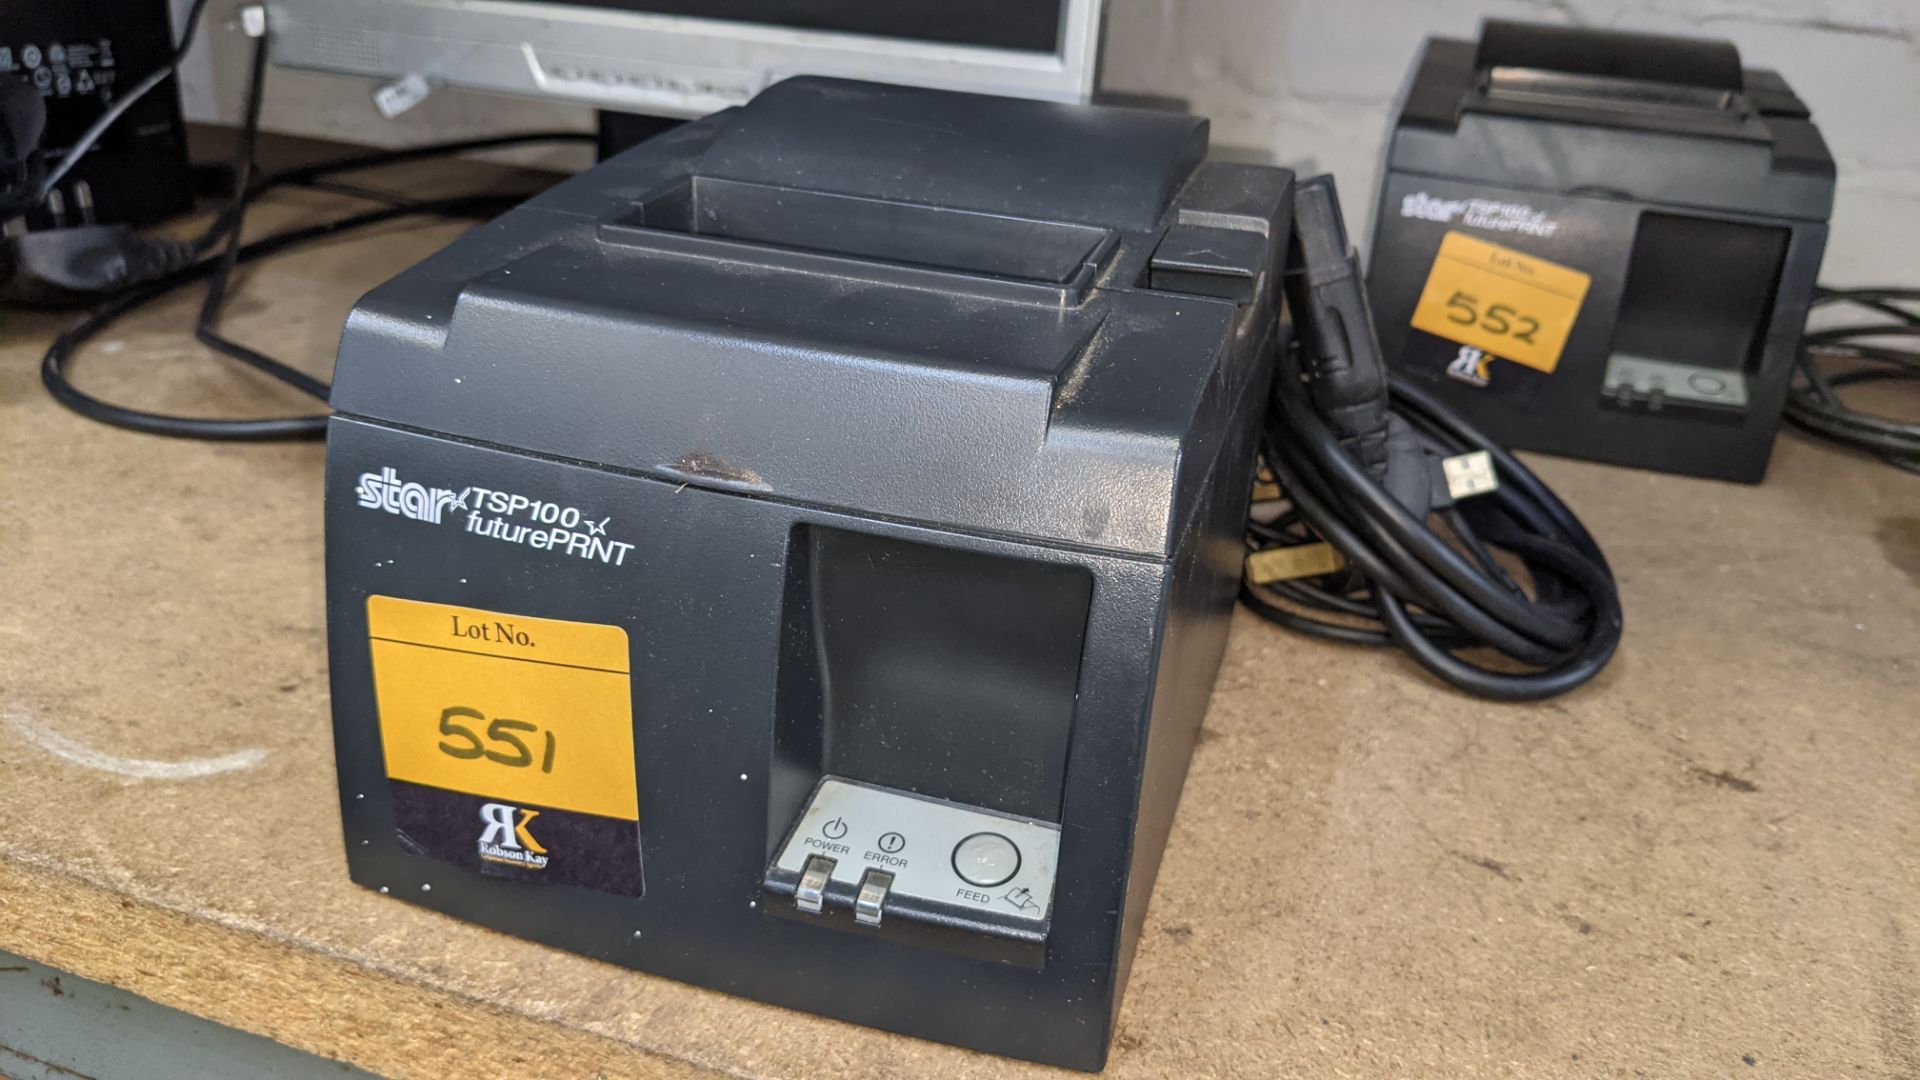 Star TSP100 label printer - includes power and usb cables.